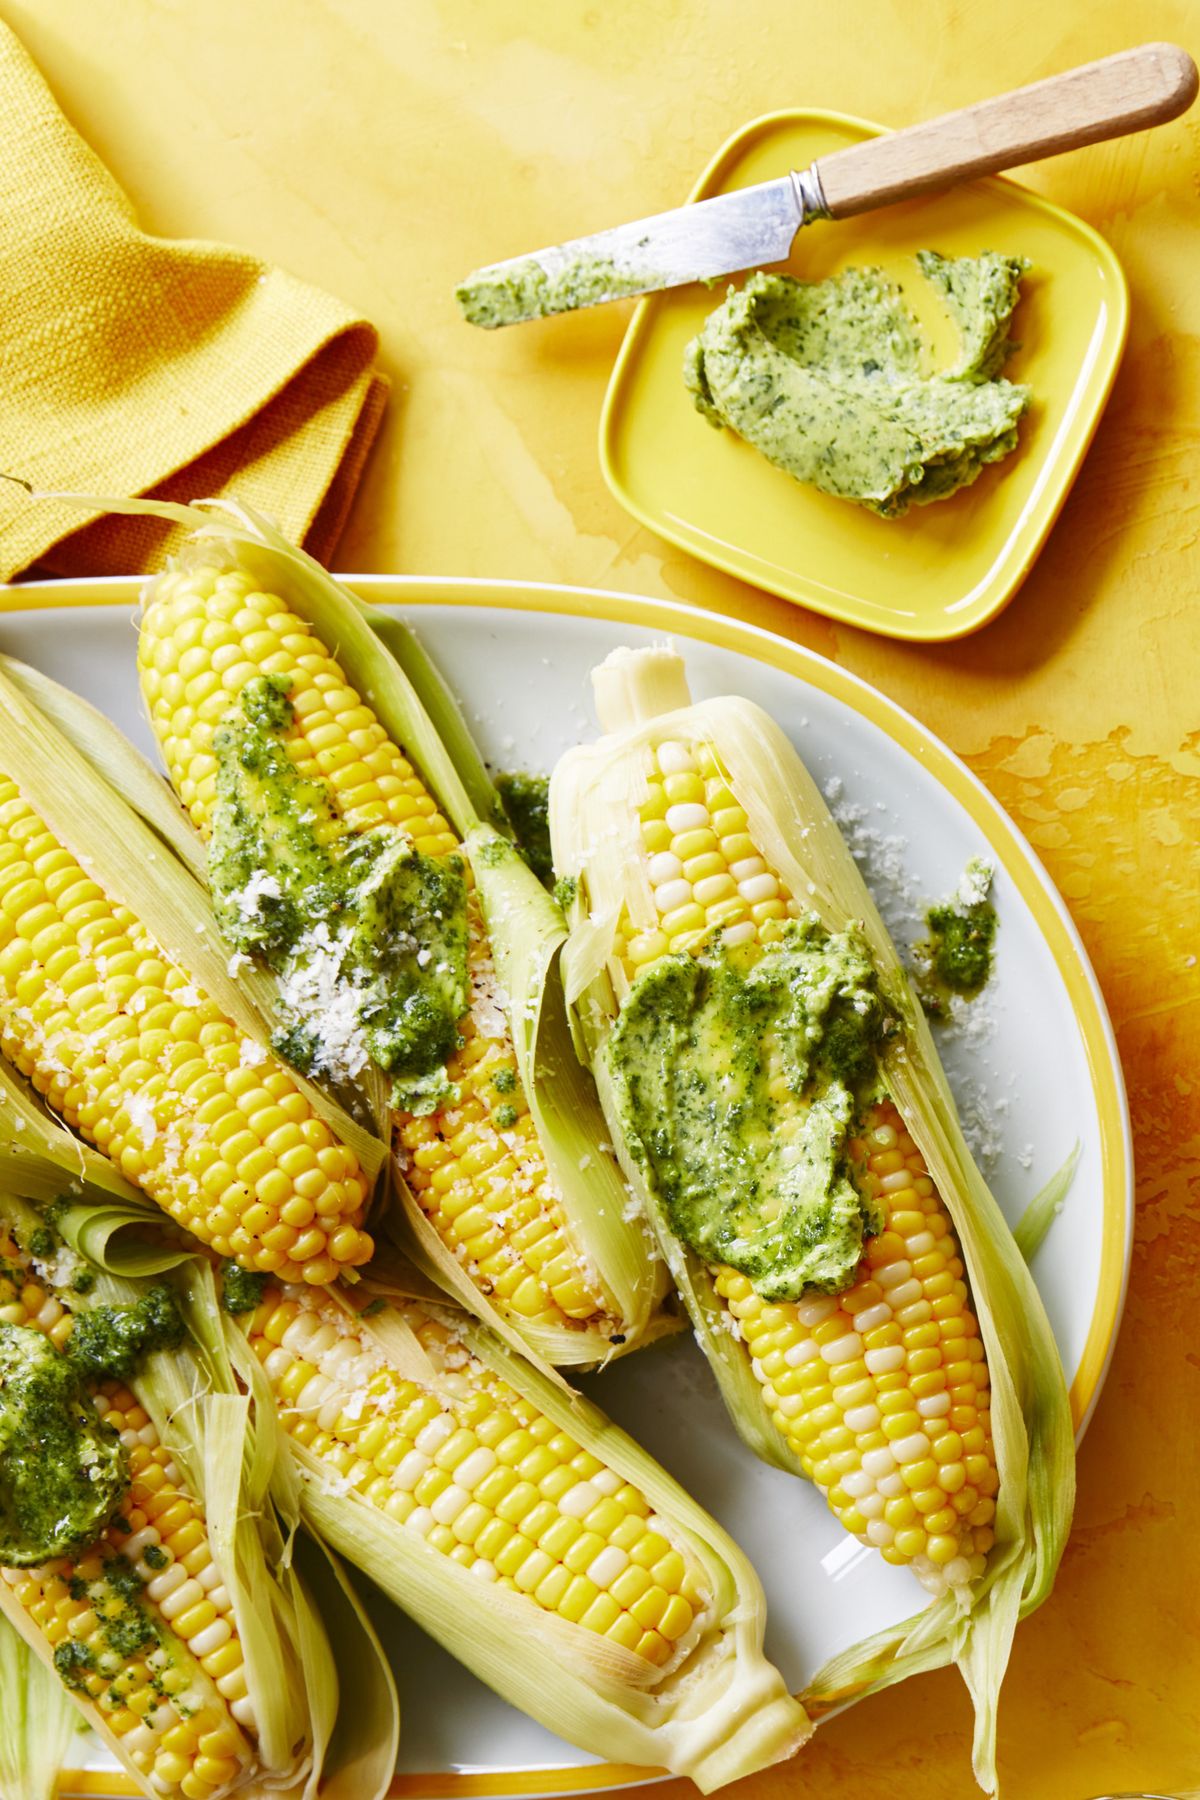 bbq side dishes  corn on the cob with parsley butter